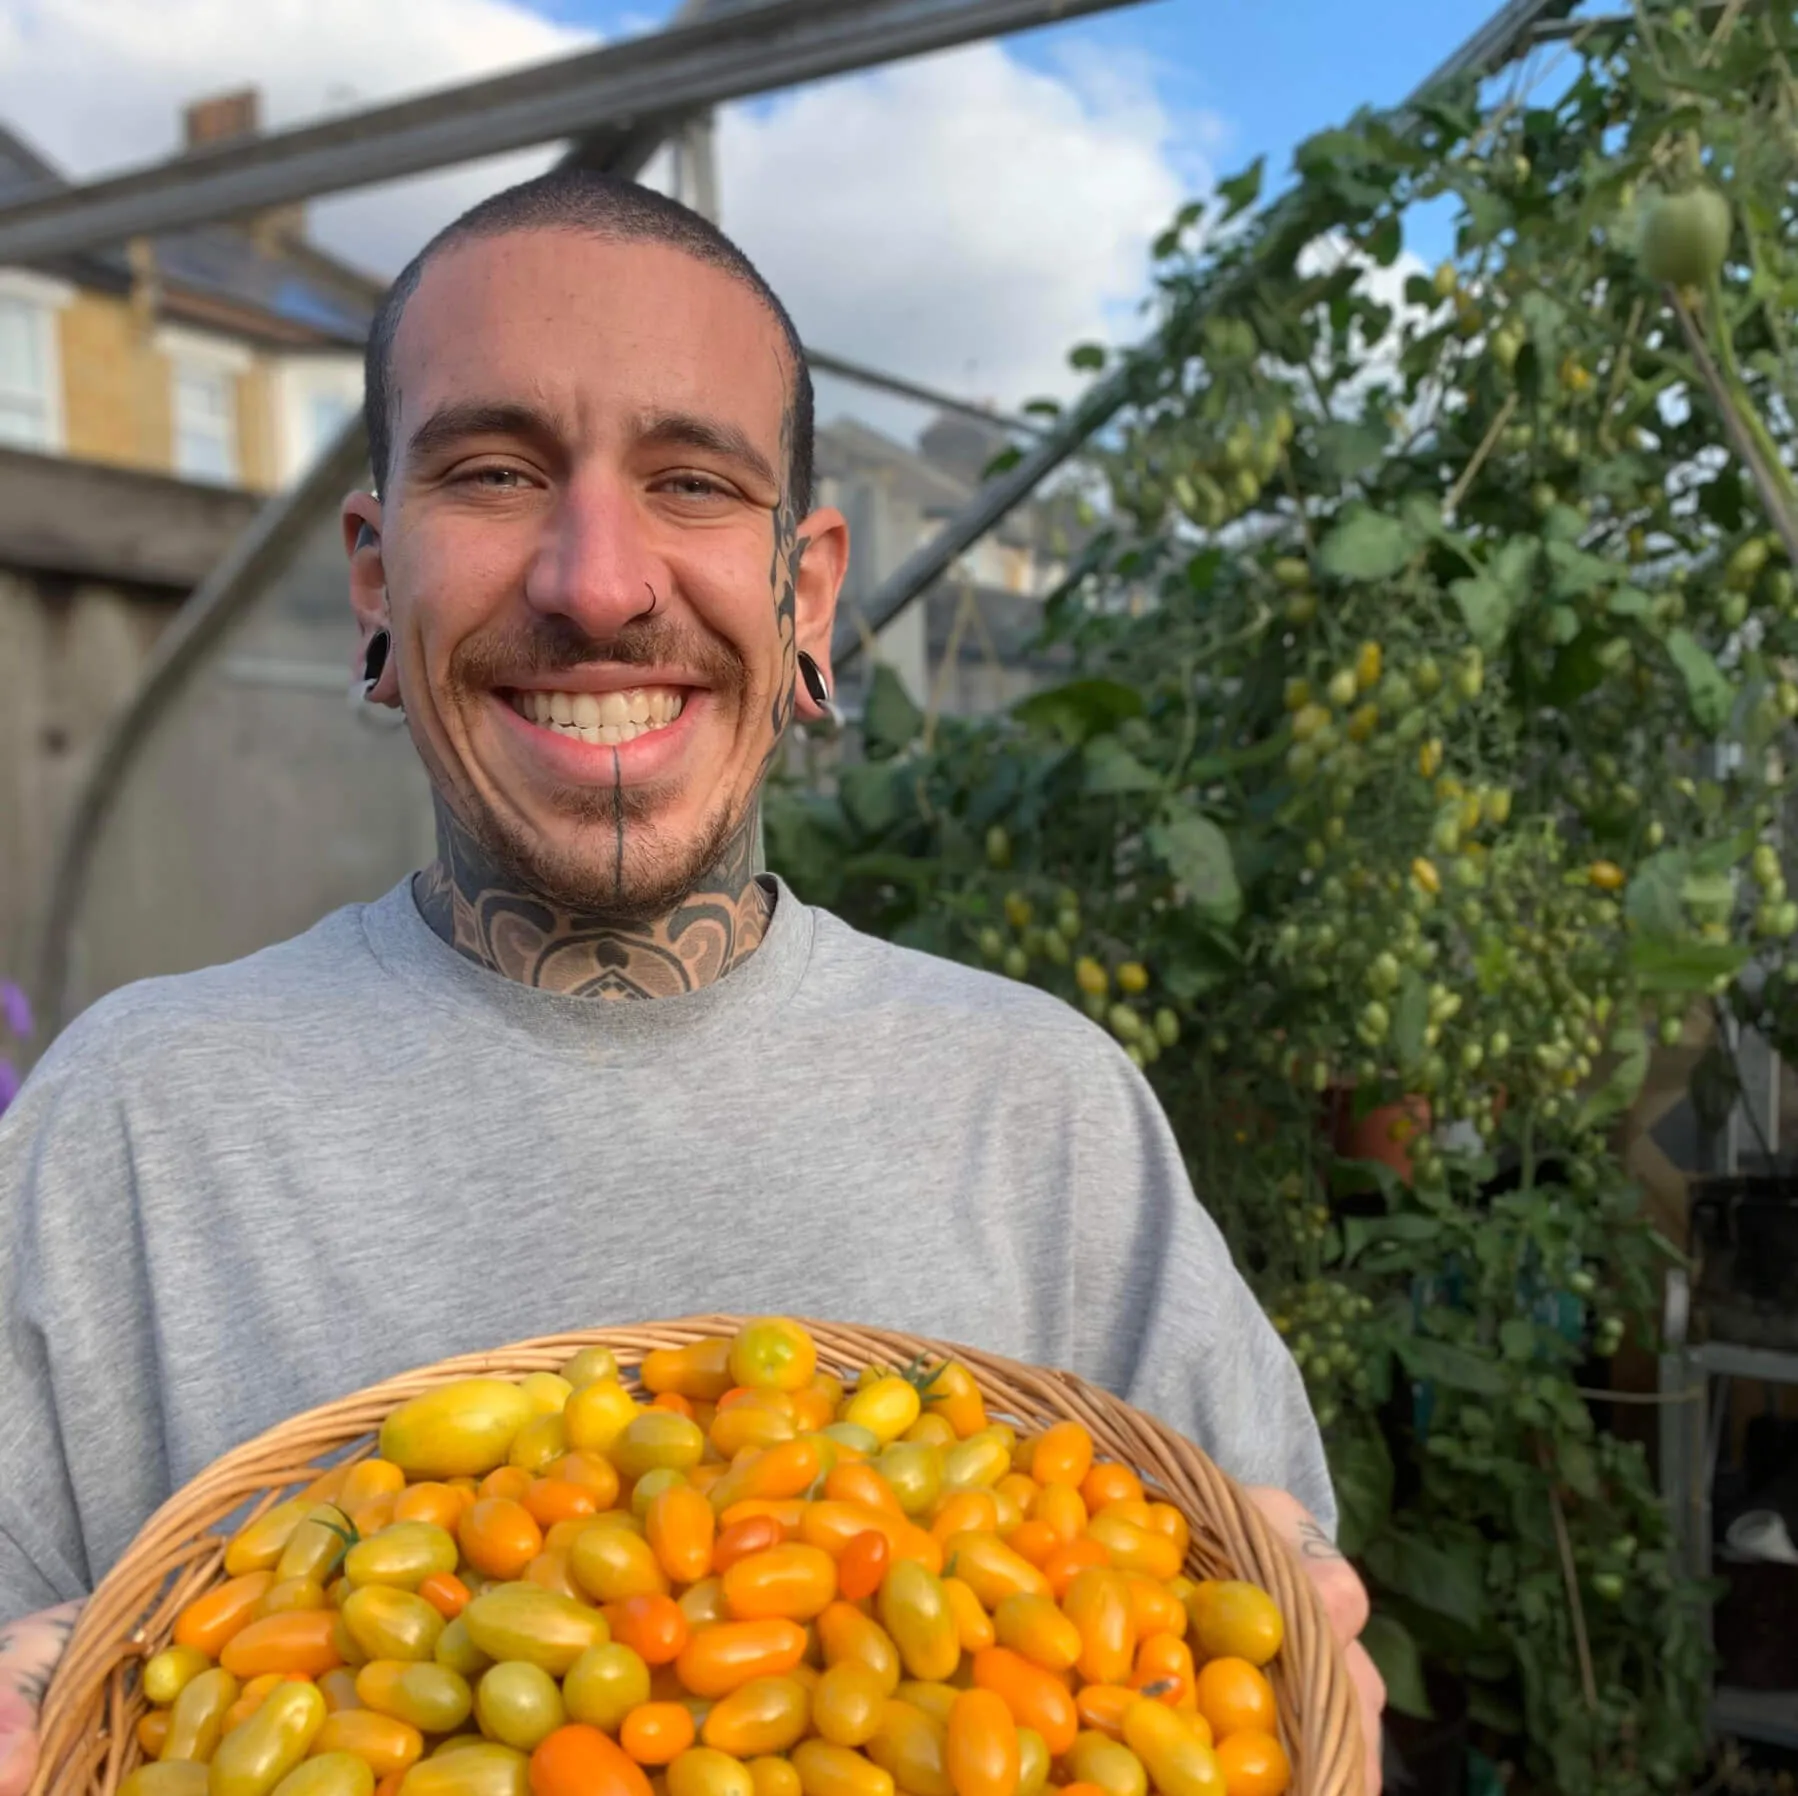 A man smiling and proudly holding a basket of small vegetables to the camera.